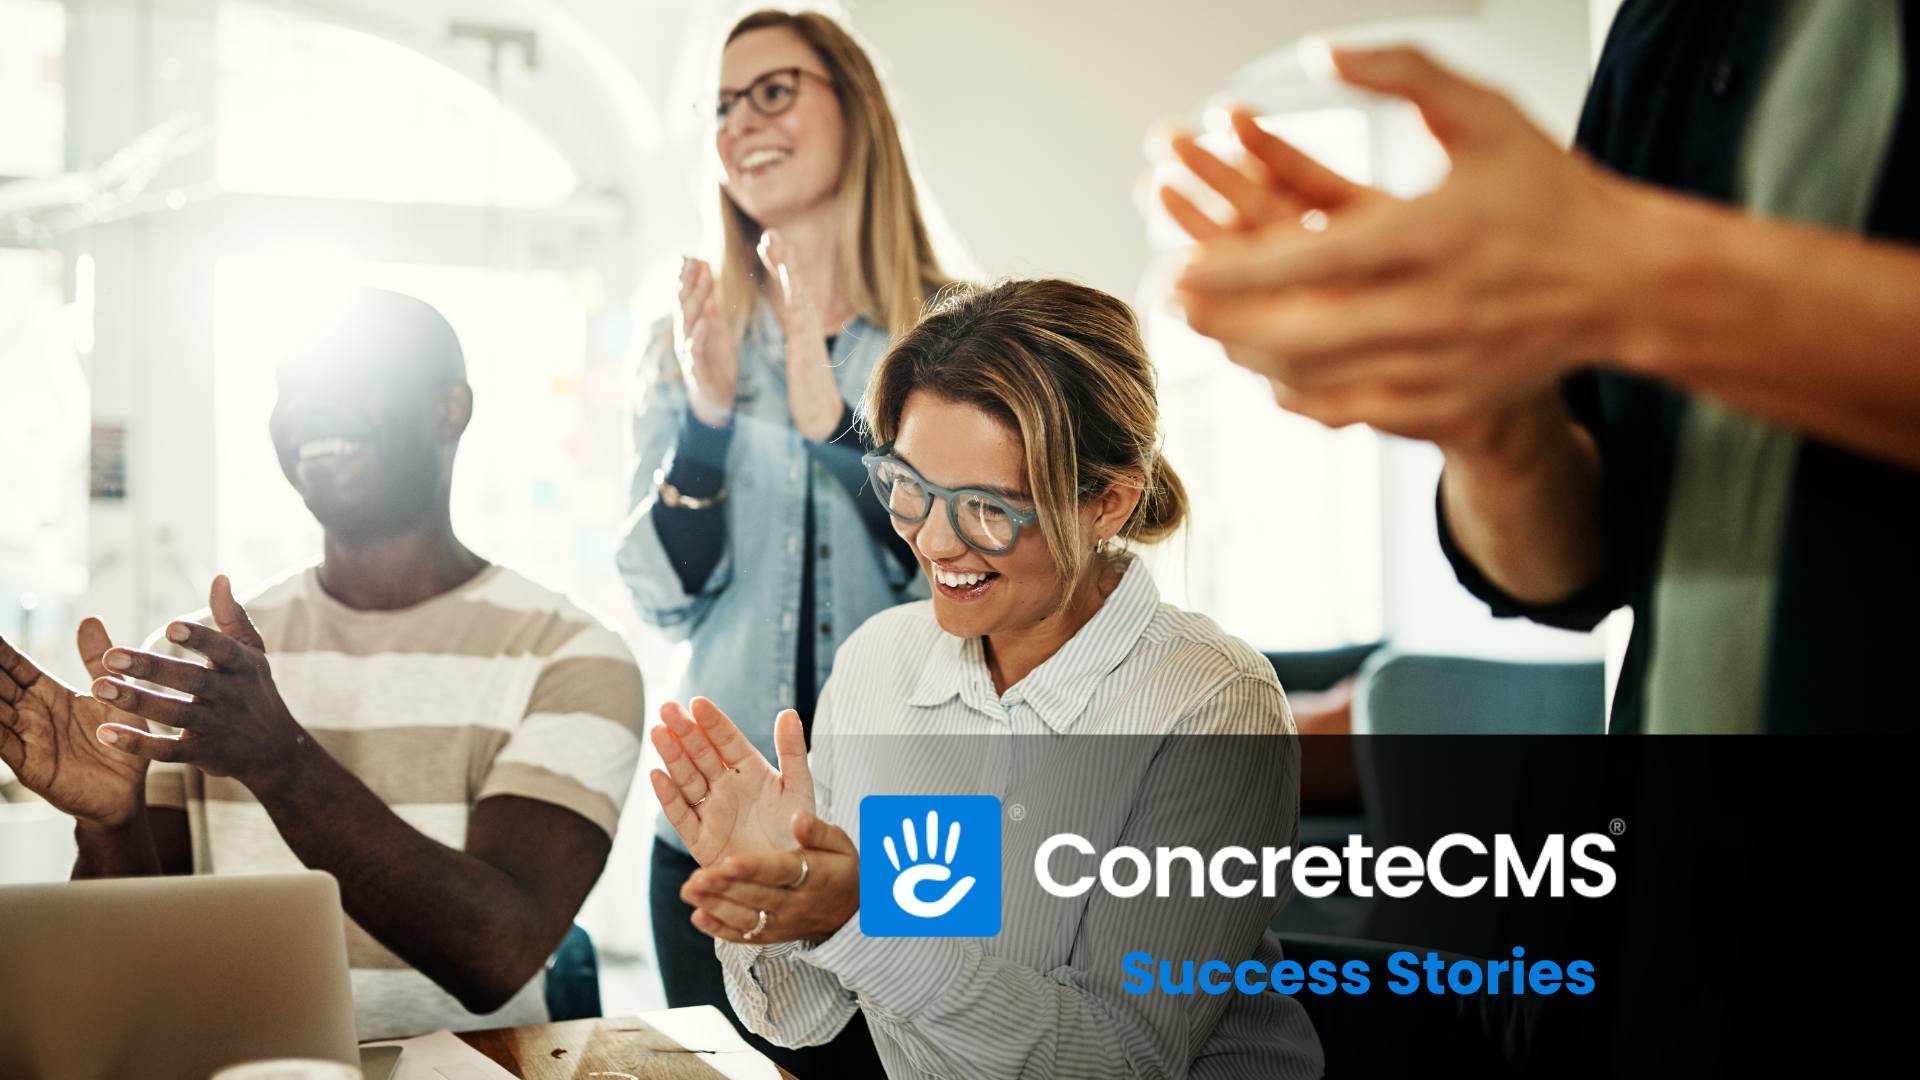 The Power of Concrete CMS: Goodwill of Western and Northern Connecticut and Walk Japan's Success Stories